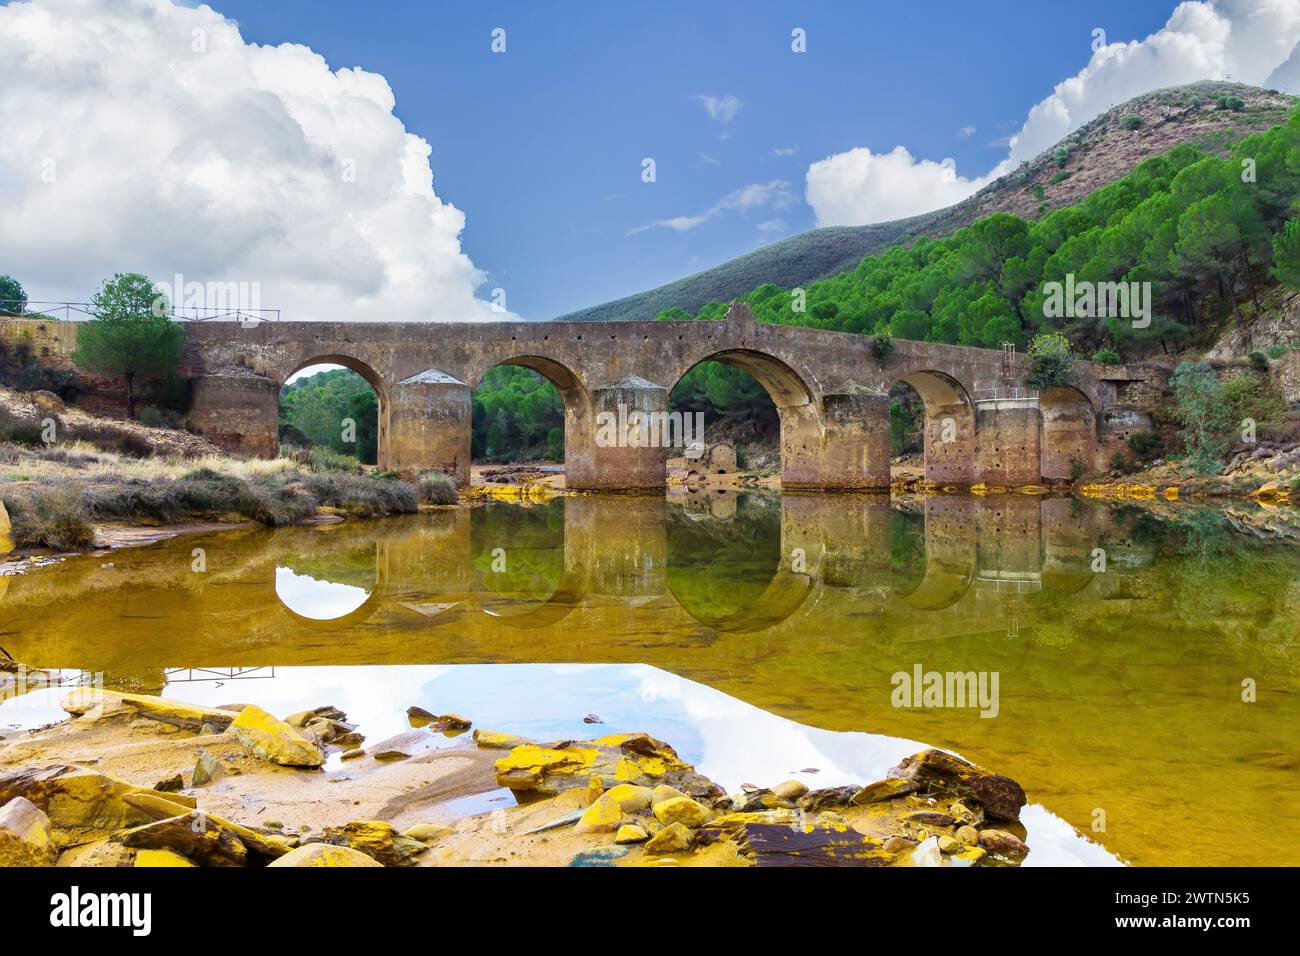 Roman bridge in the hiking route of the water mills along the Odiel river from Sotiel Coronada, in Huelva province, Andalusia, Spain Stock Photo